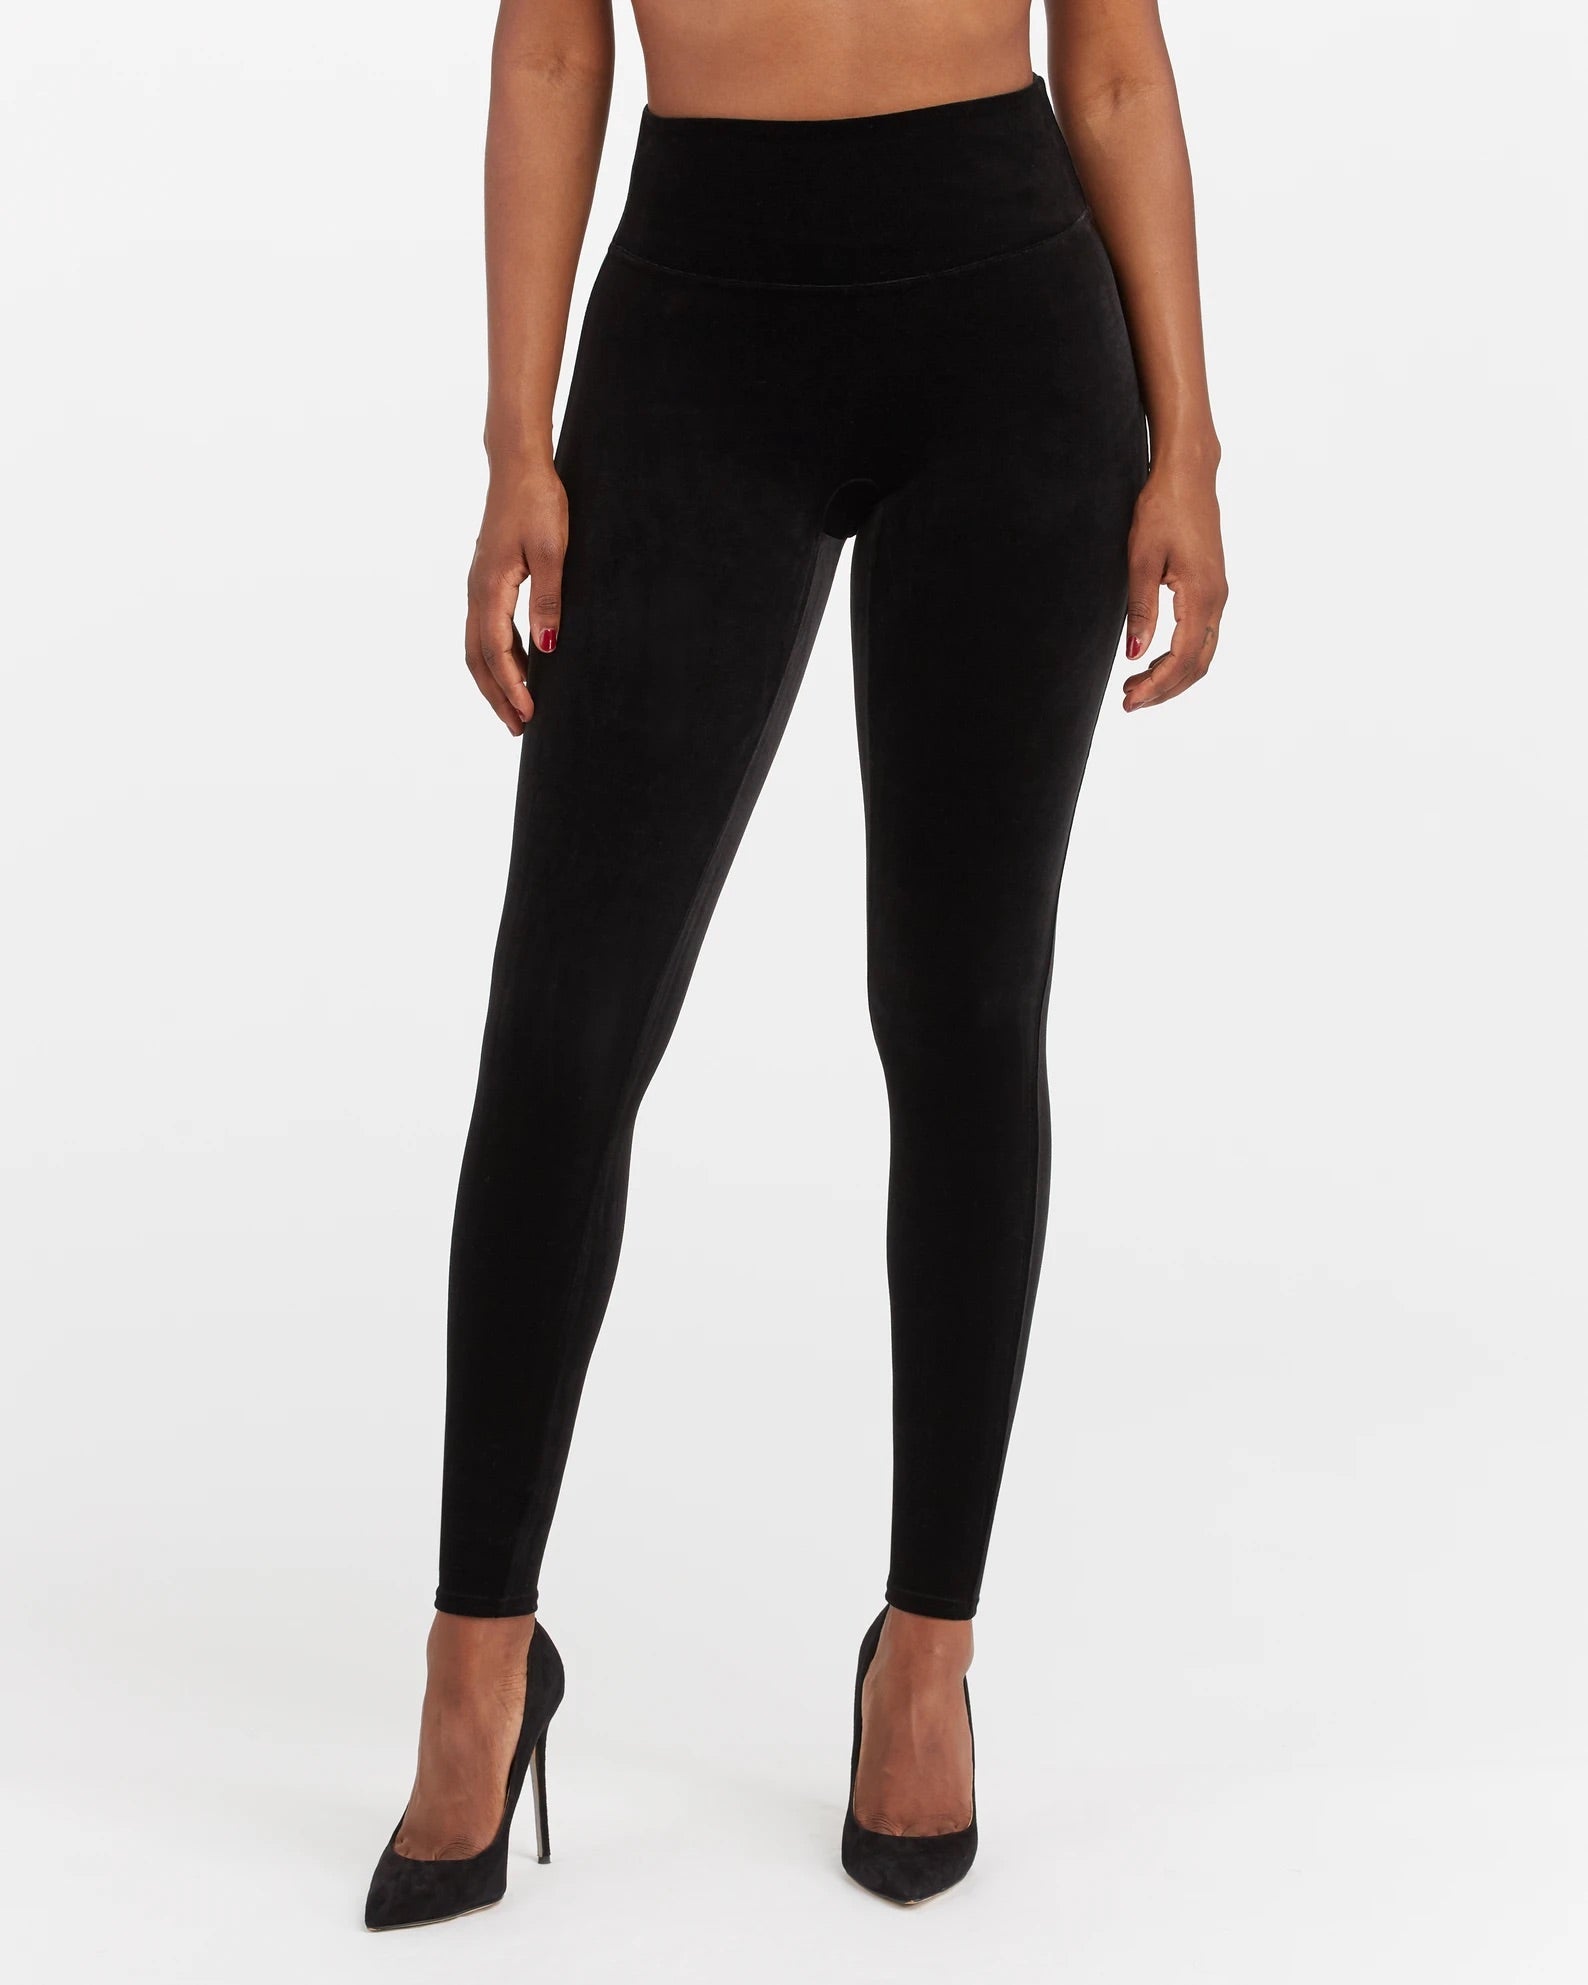 SPANX ASSETS Black High Waisted Stretchy Leggings